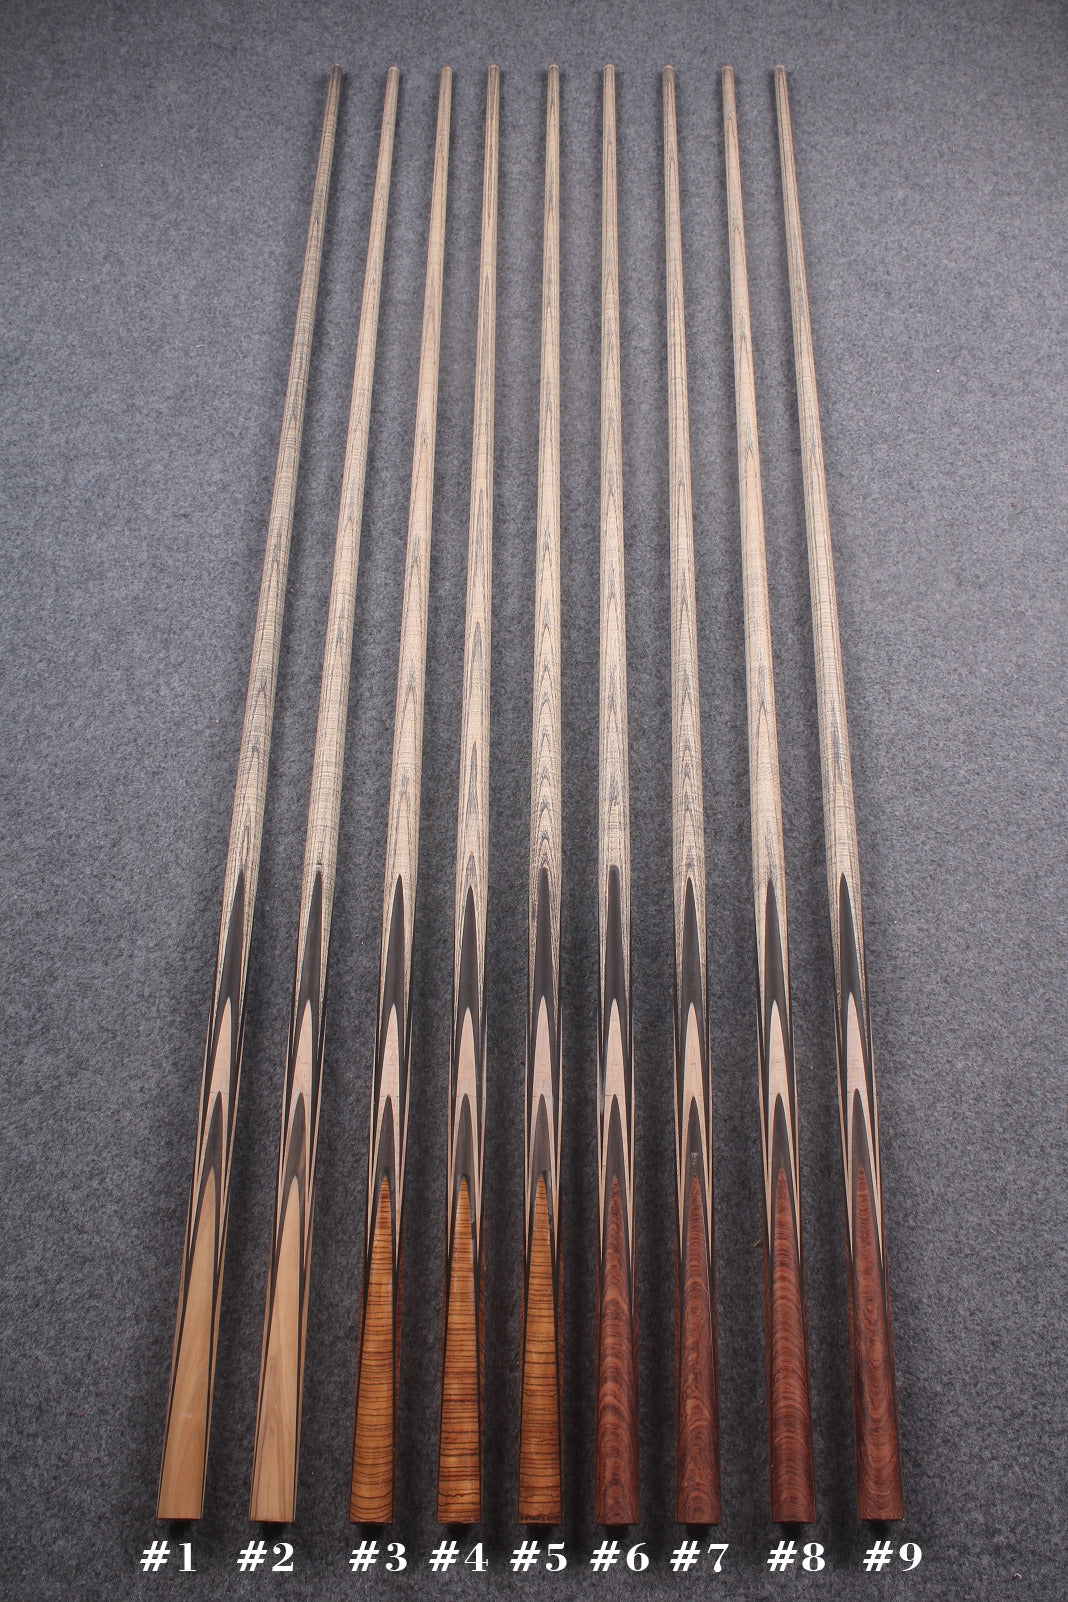 custom-made: ★★★ woods 1 piece handmade ASH snooker / pool cue # - made to order